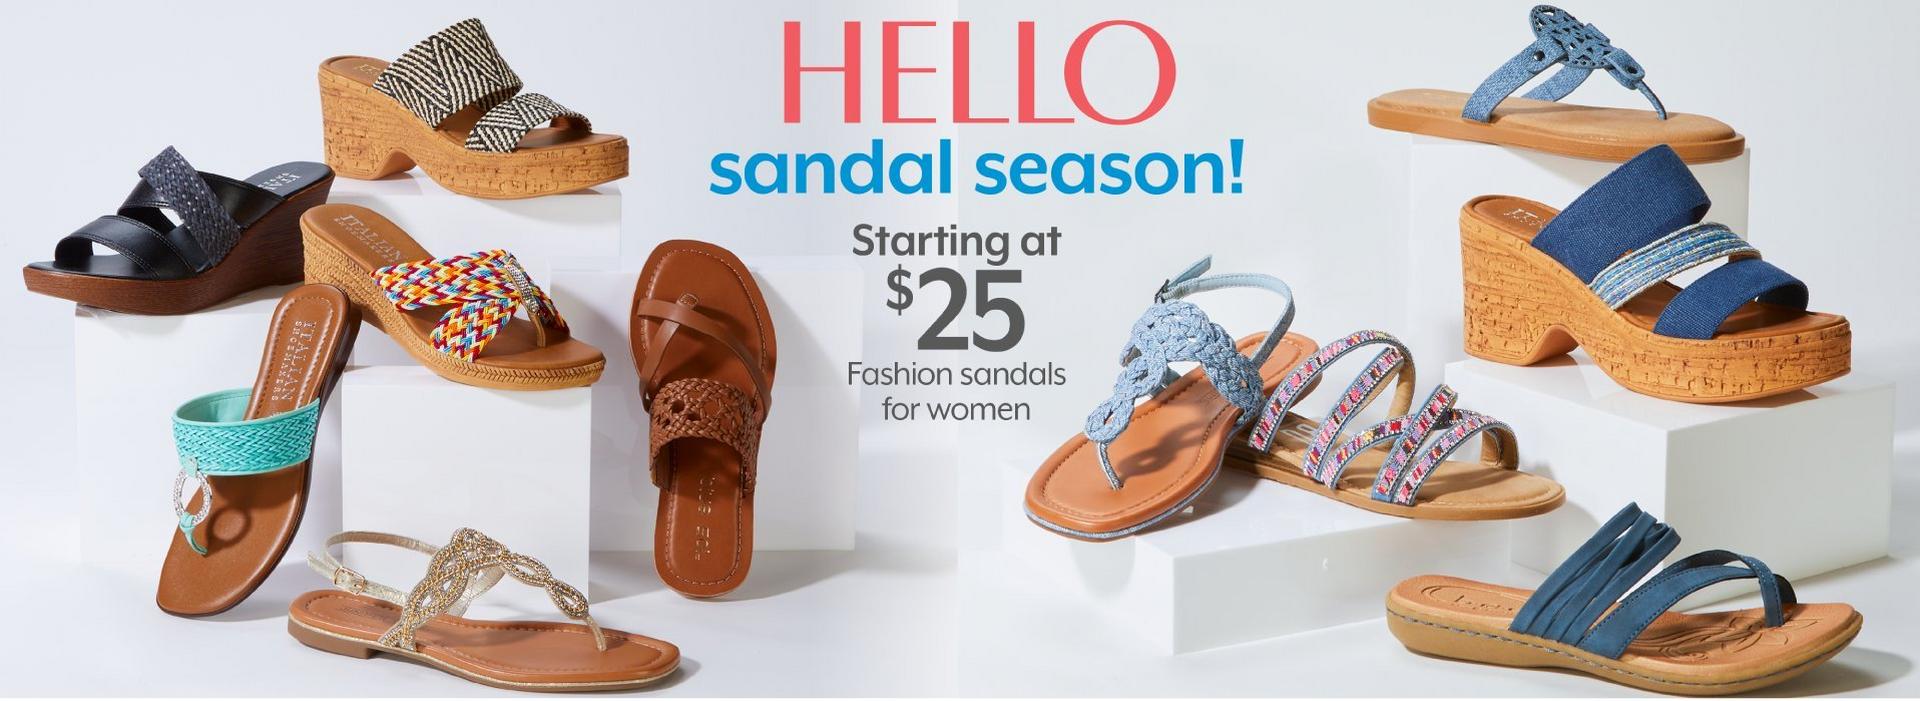 STARTING AT $25 Sandals for women